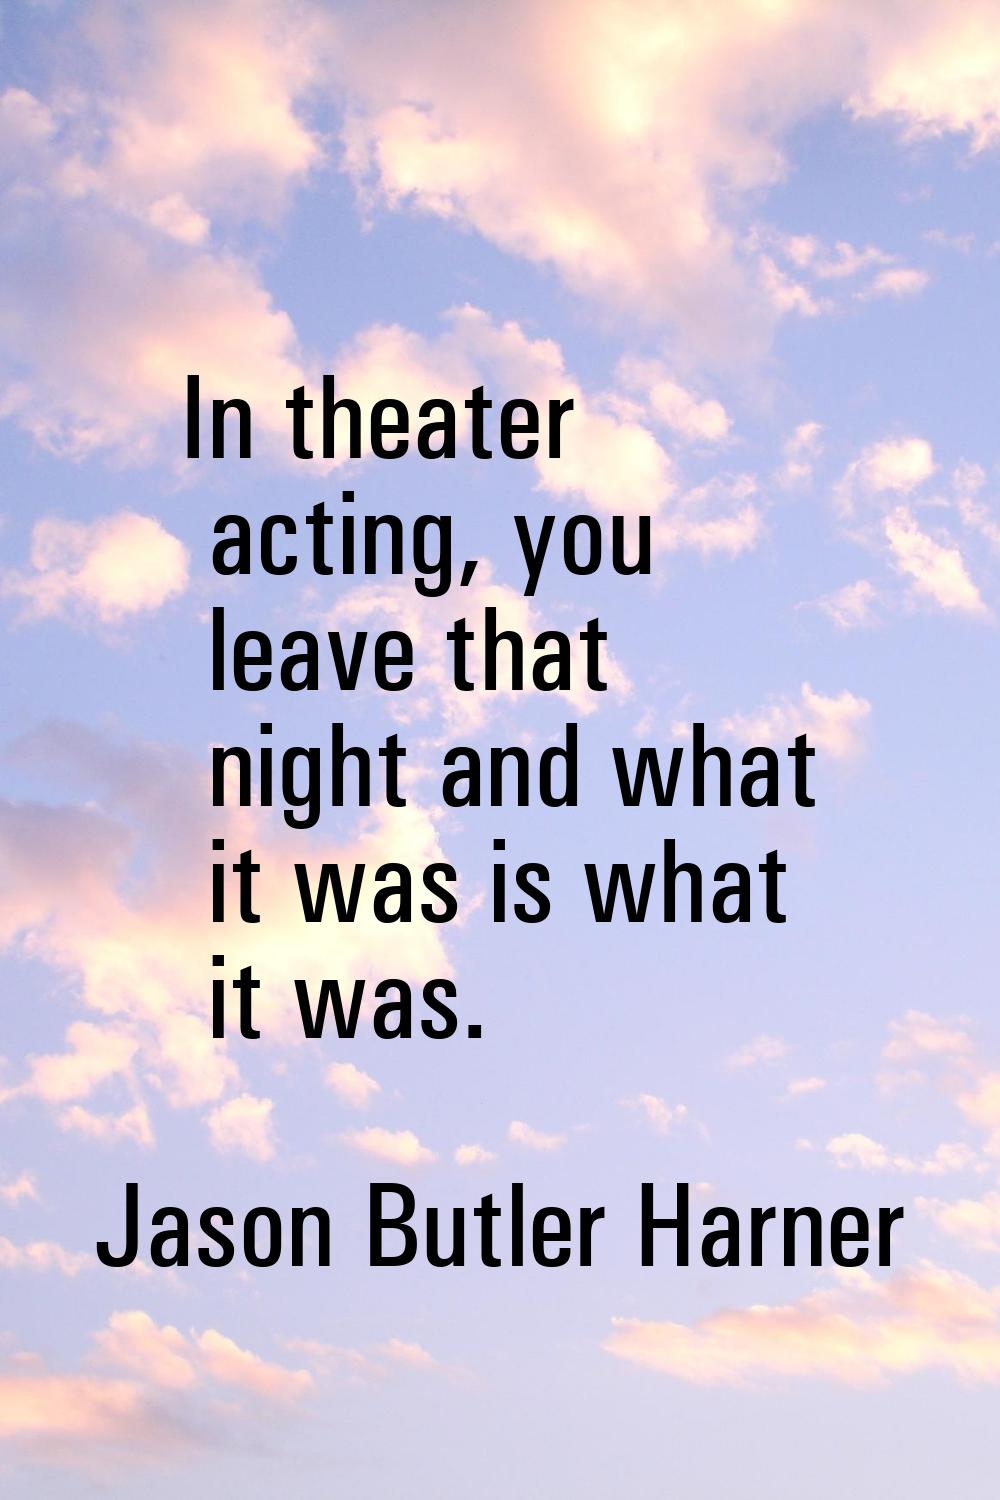 In theater acting, you leave that night and what it was is what it was.